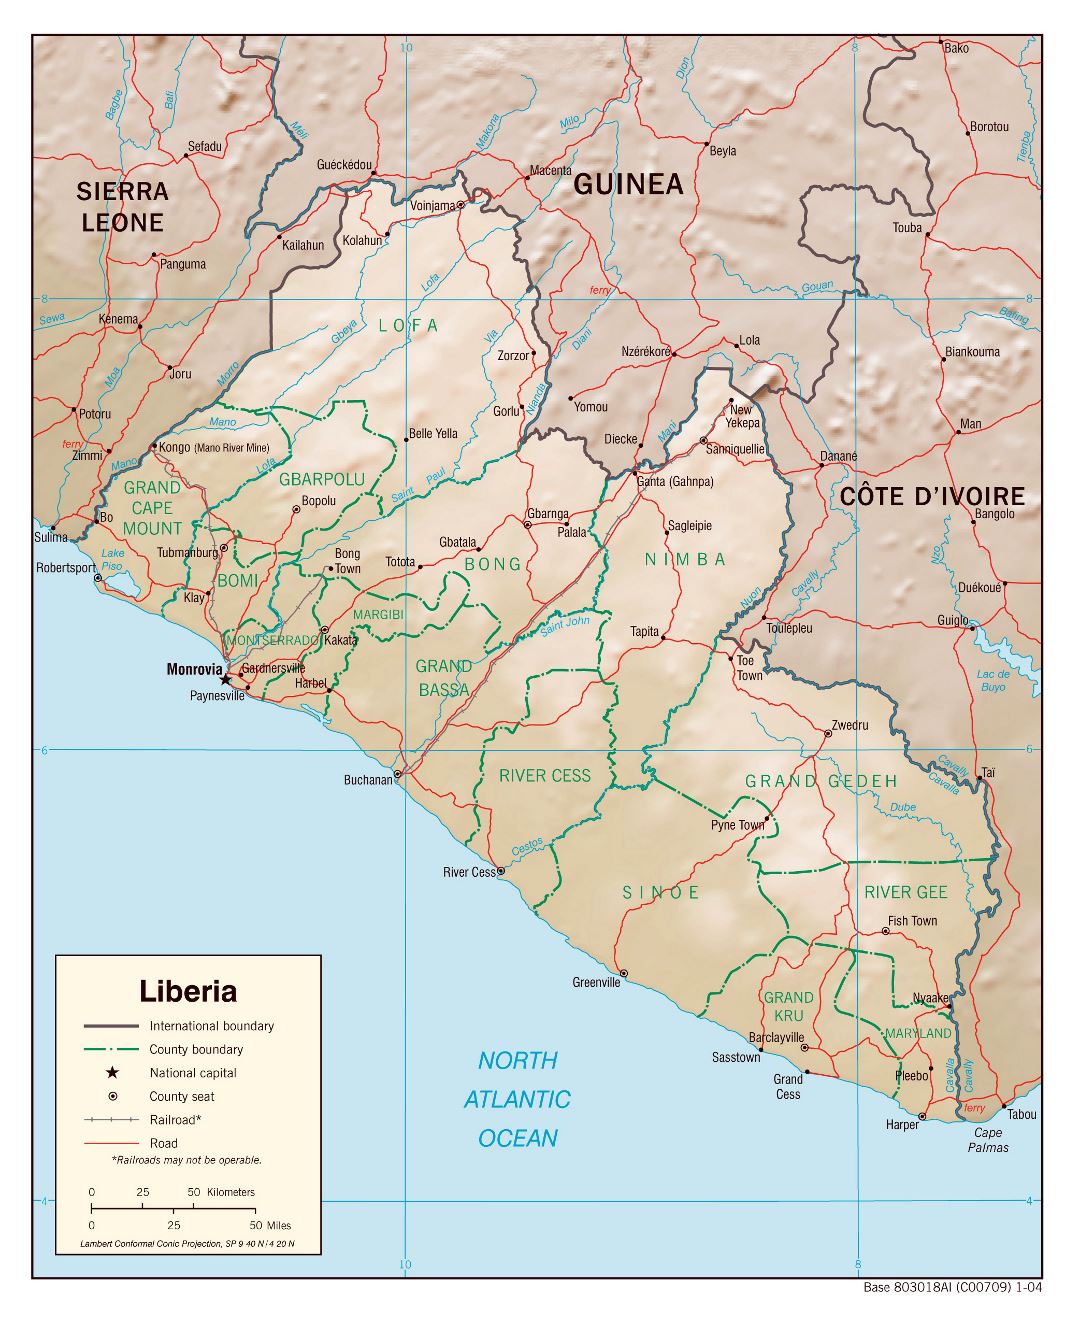 Large detailed political and administrative map of Liberia with relief, roads, railroads and major cities - 2004